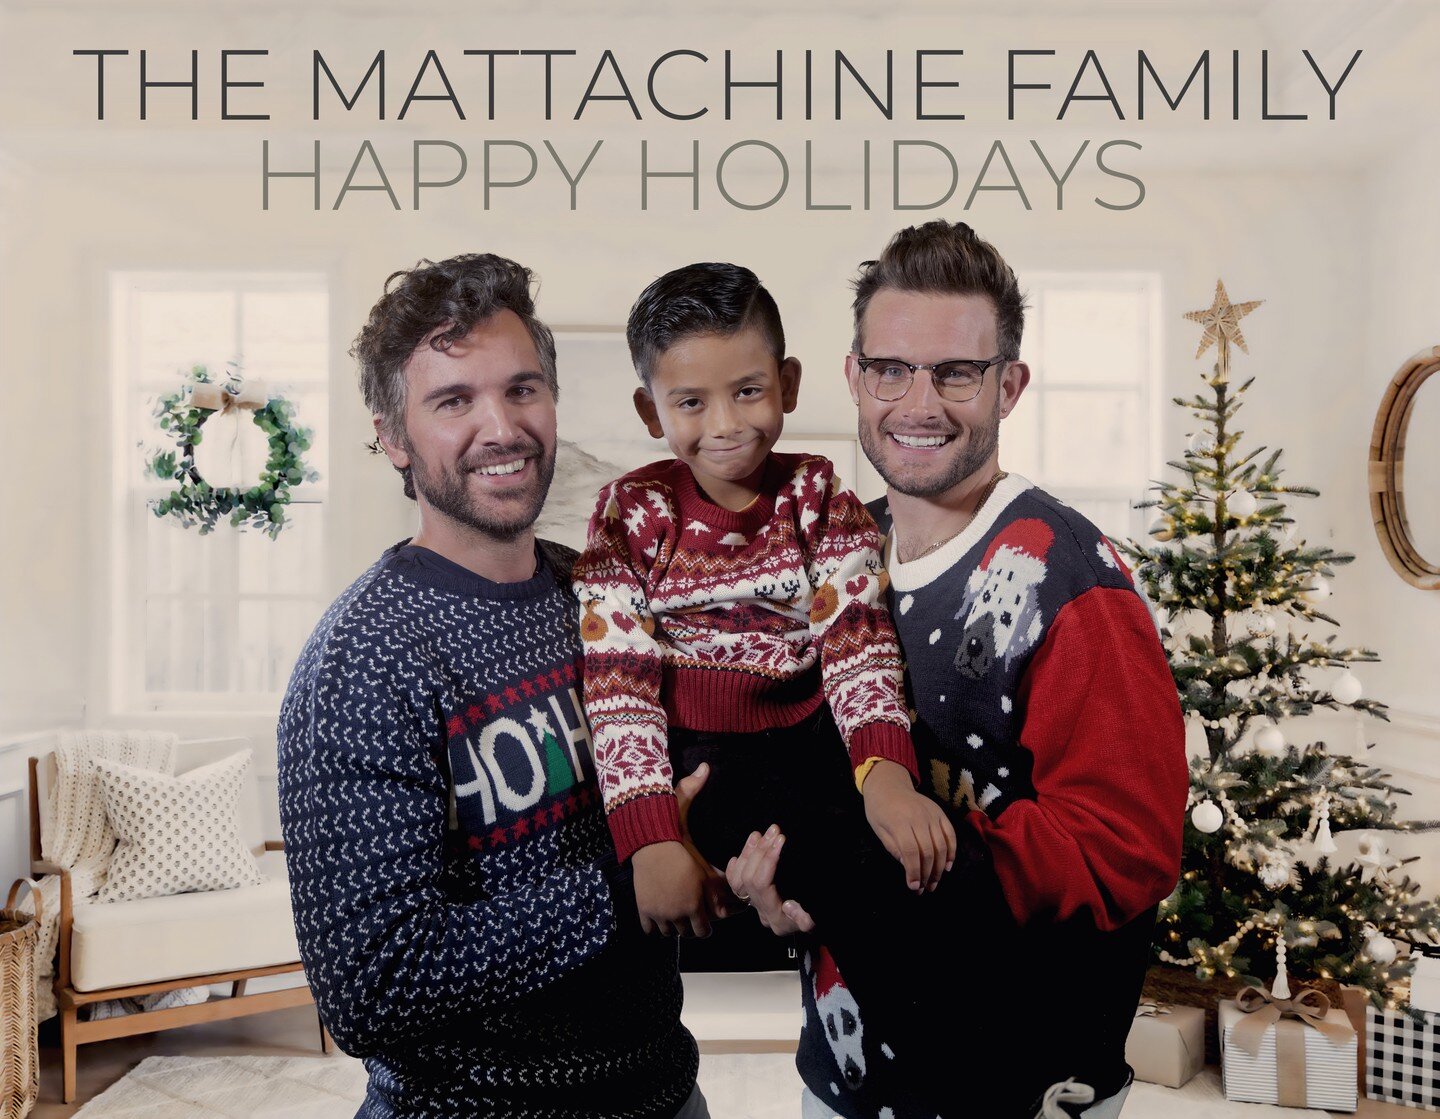 Wishing you all the warmth and joy of the season! 🌟 

Happy holidays from our Family to your family. May this festive season be filled with love, laughter, and cherished moments. 🎄✨ 

#HappyHolidays #MattachineFamily #SeasonsGreetings